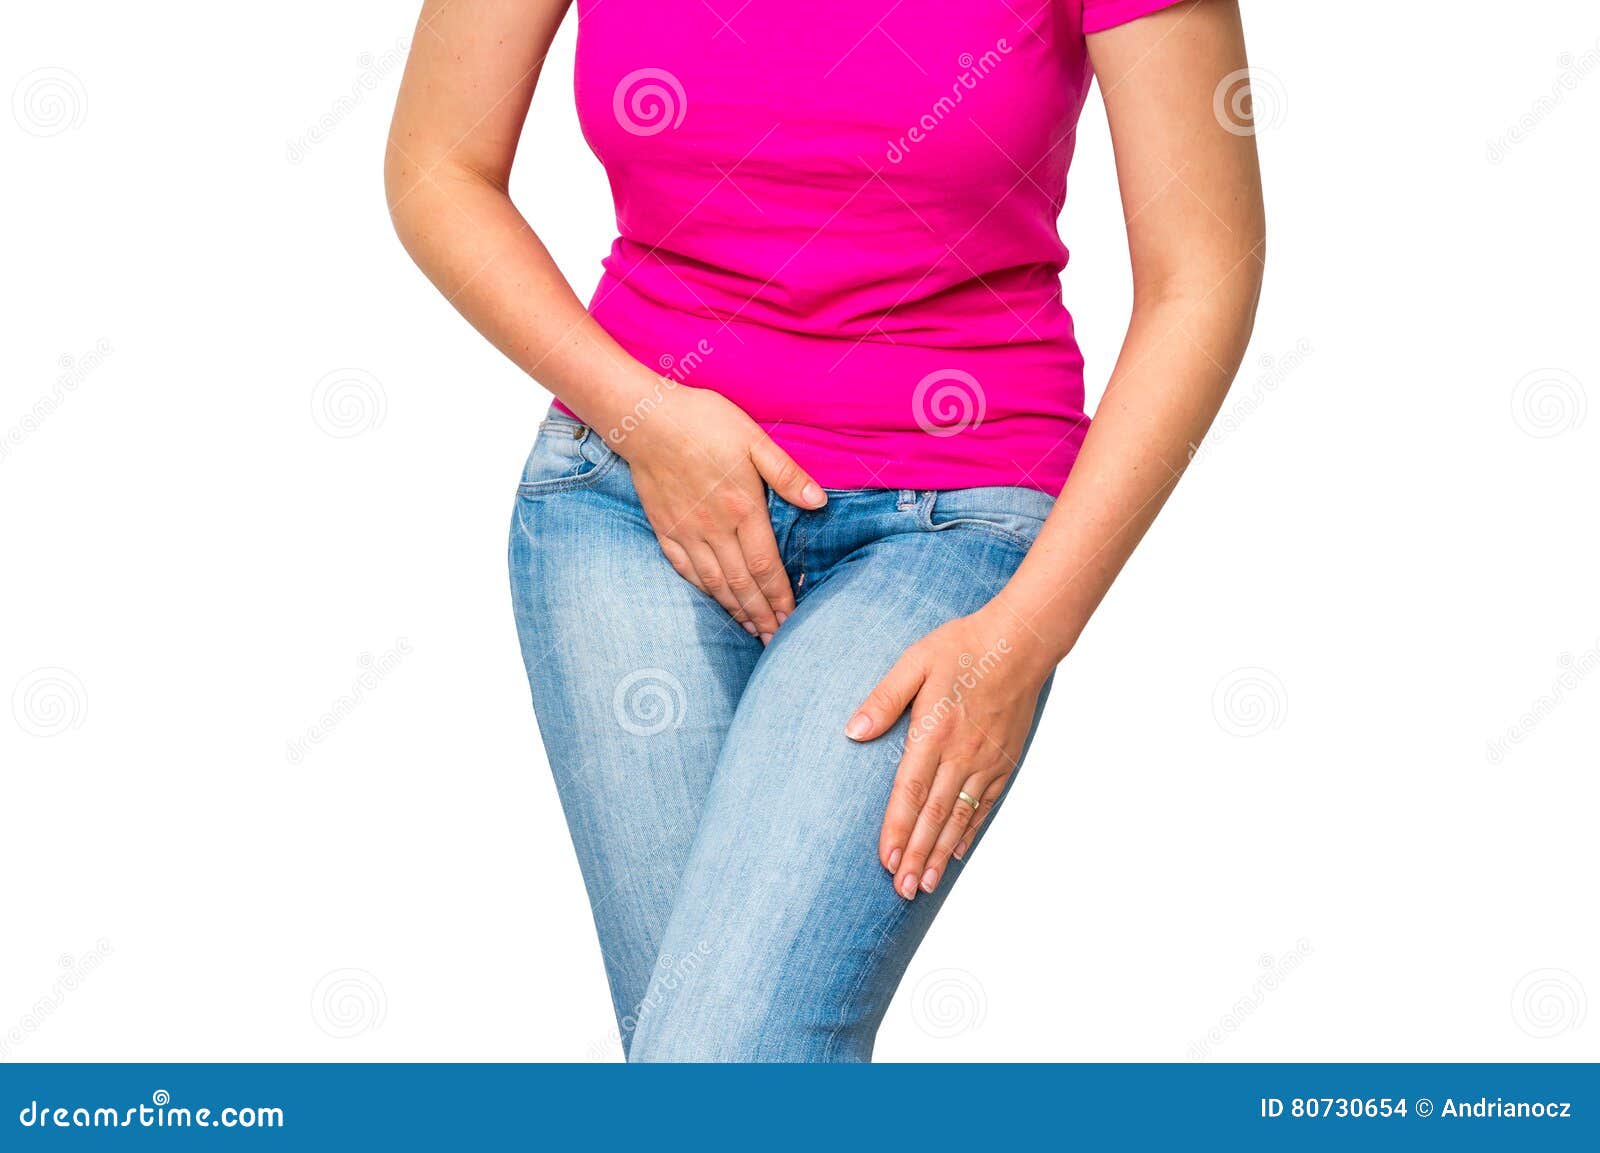 woman with hands holding her crotch - incontinence concept